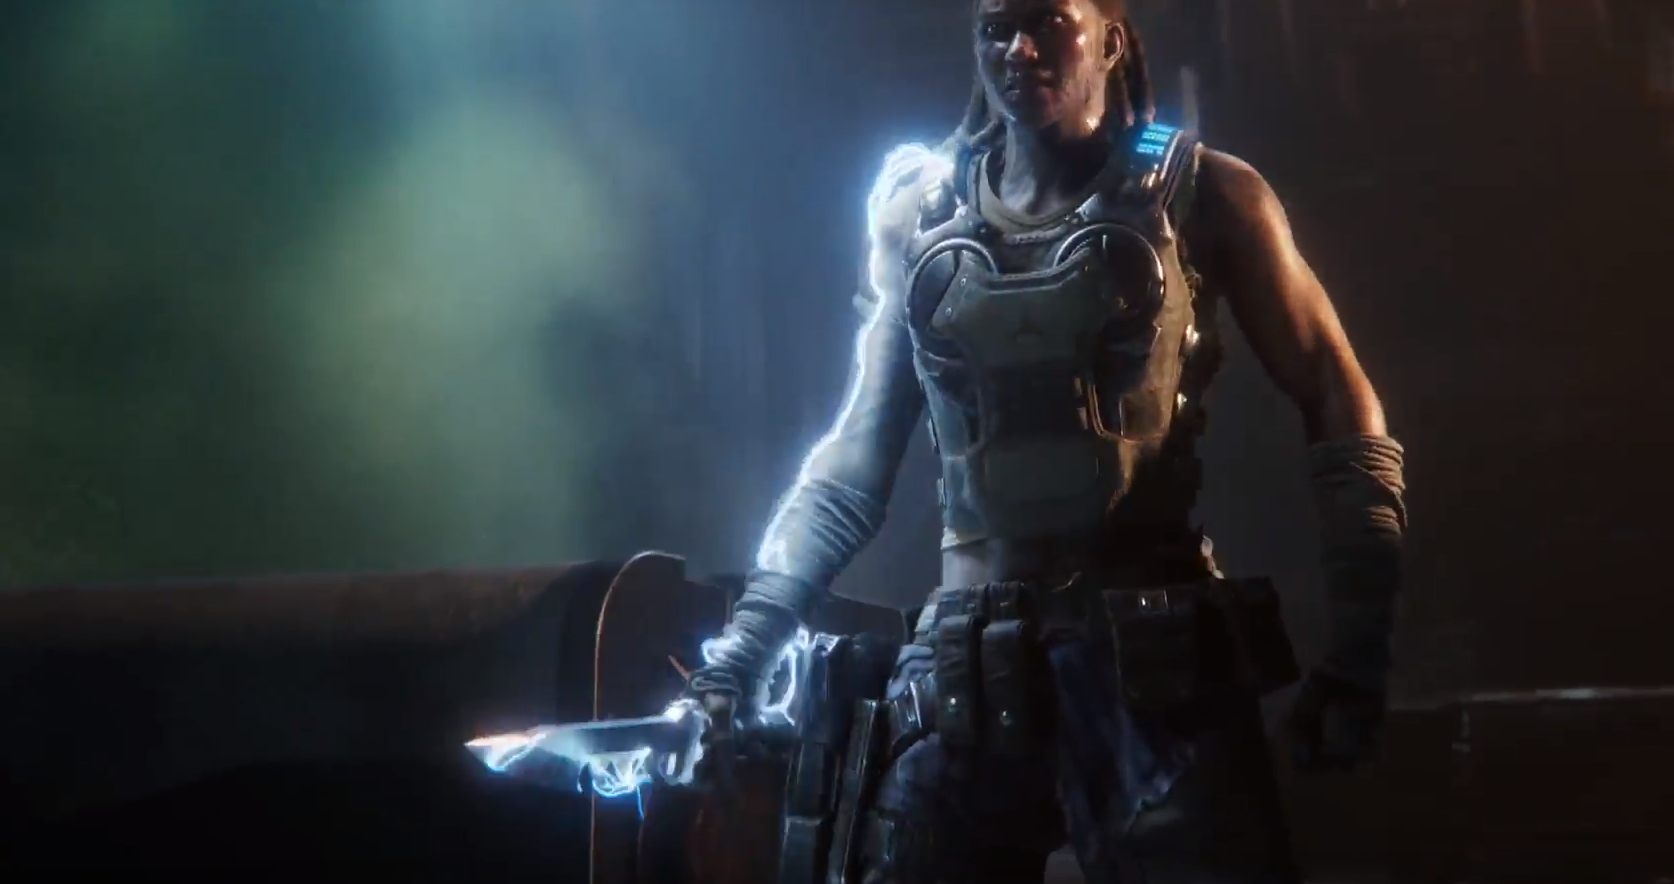 14 Minutes of Gears 5 Escape Gameplay - E3 2019 